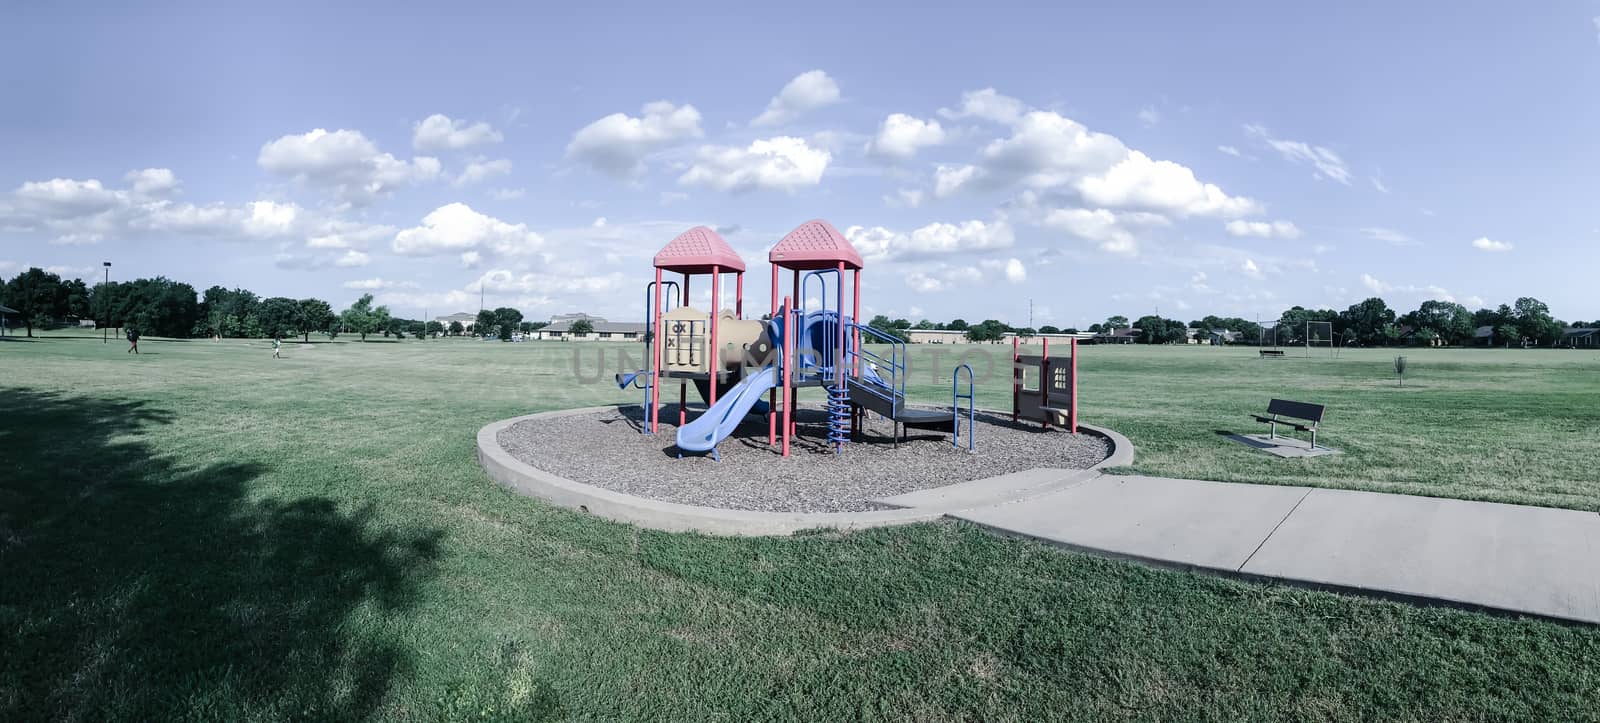 Panorama view colorful playground at public park in Texas, America with cloud blue sky on green grass lawn